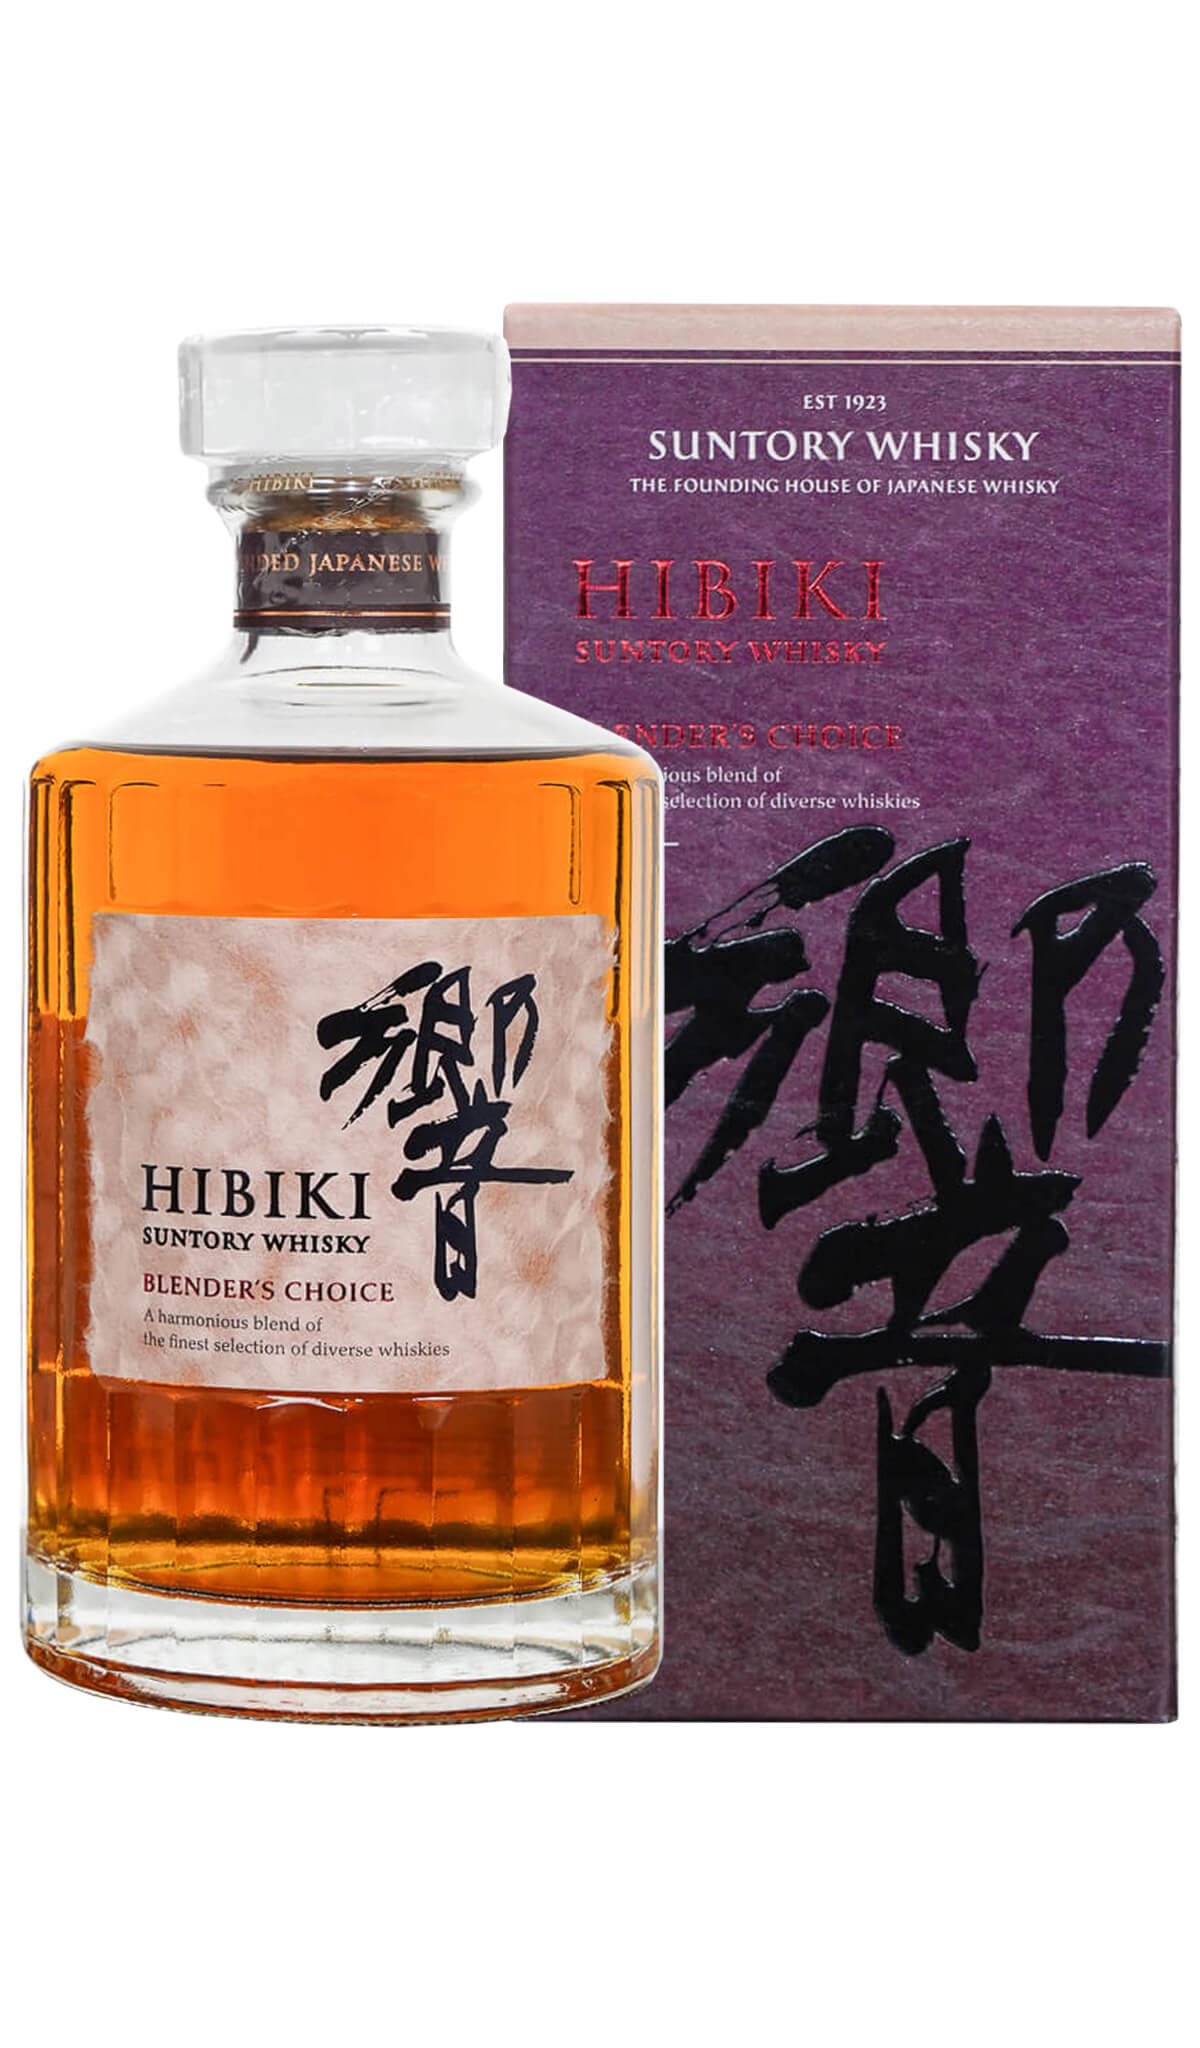 Find out more, explore the range and buy Suntory Hibiki Blenders Choice Whisky 700ml (Gift Boxed) available online at Wine Sellers Direct - Australia's independent liquor specialists.